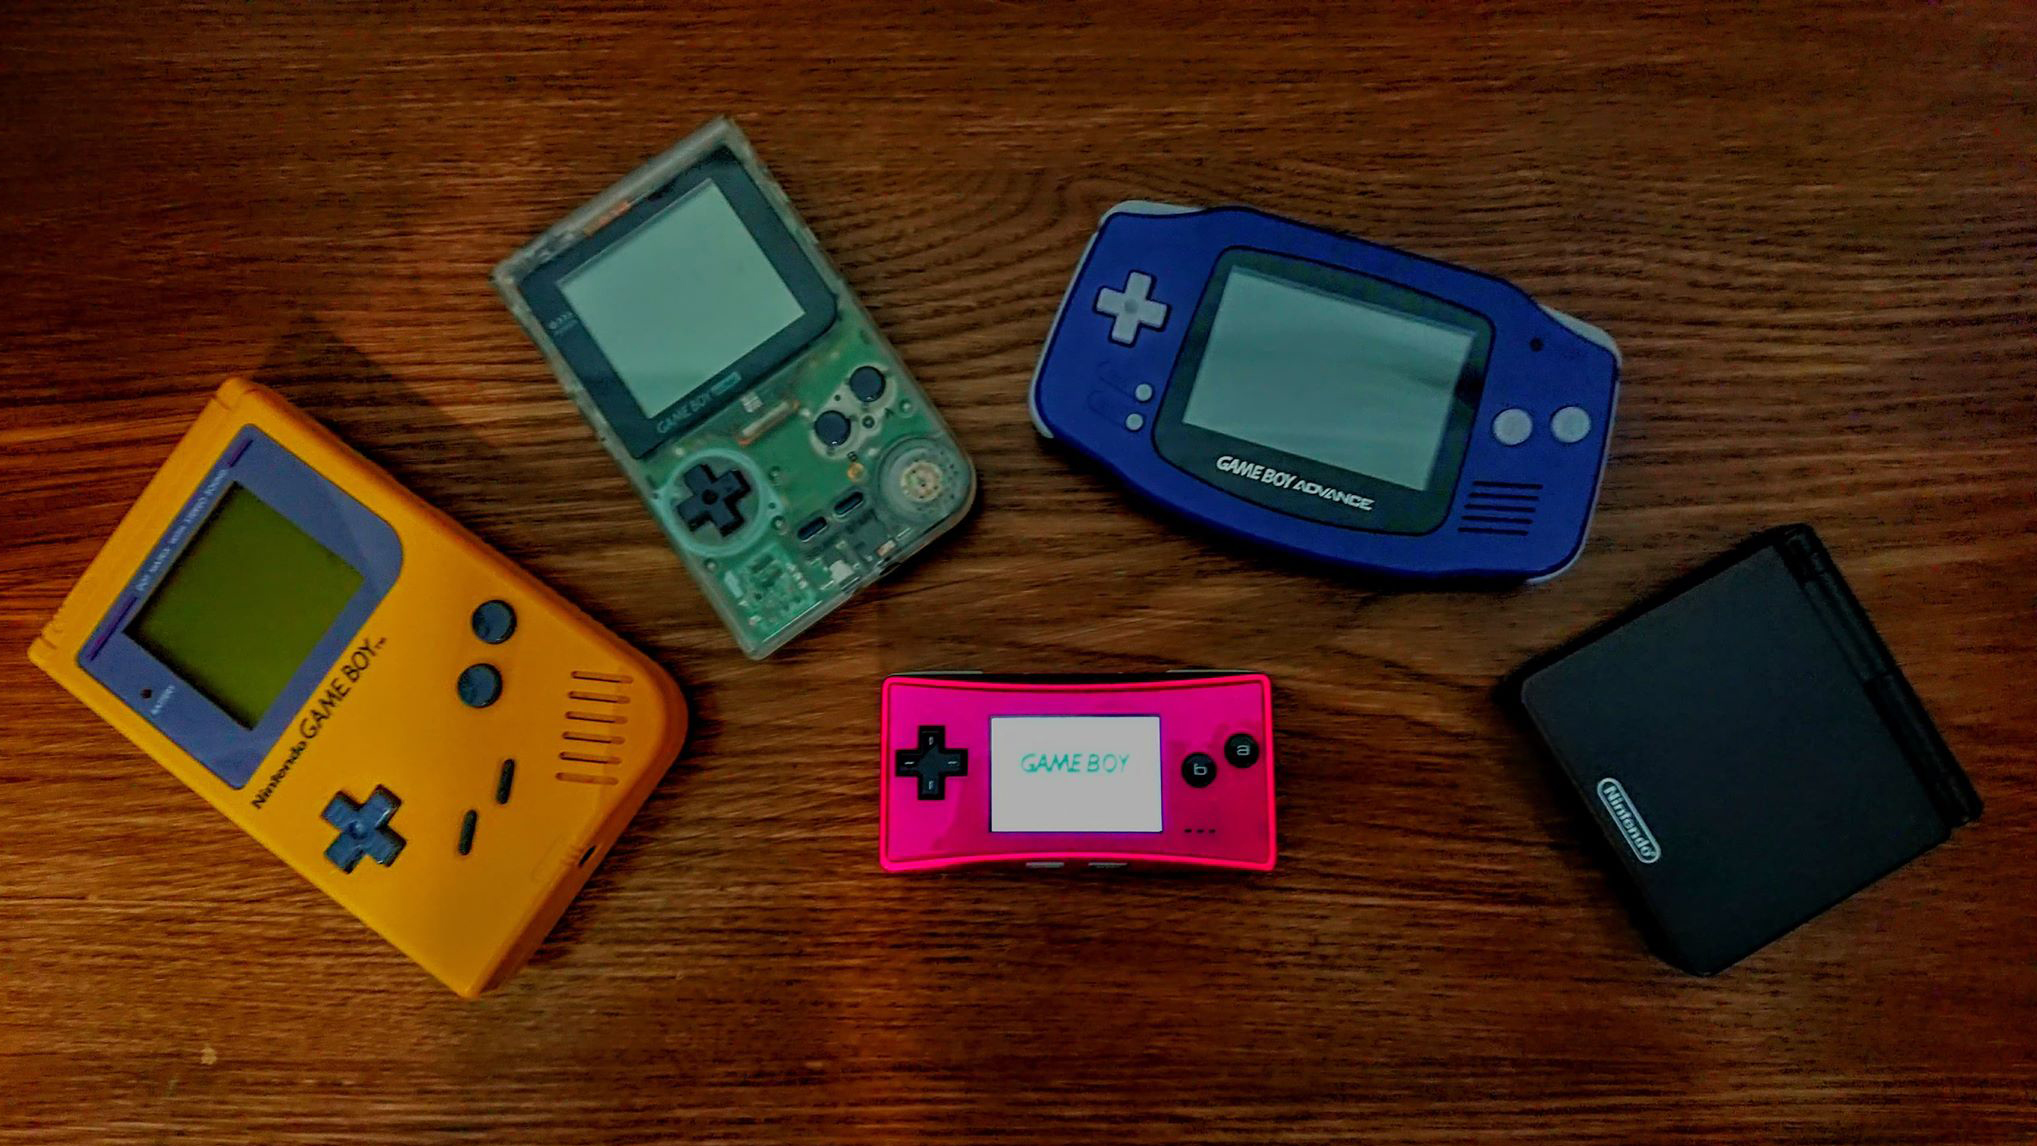 Collection of Game Boy systems